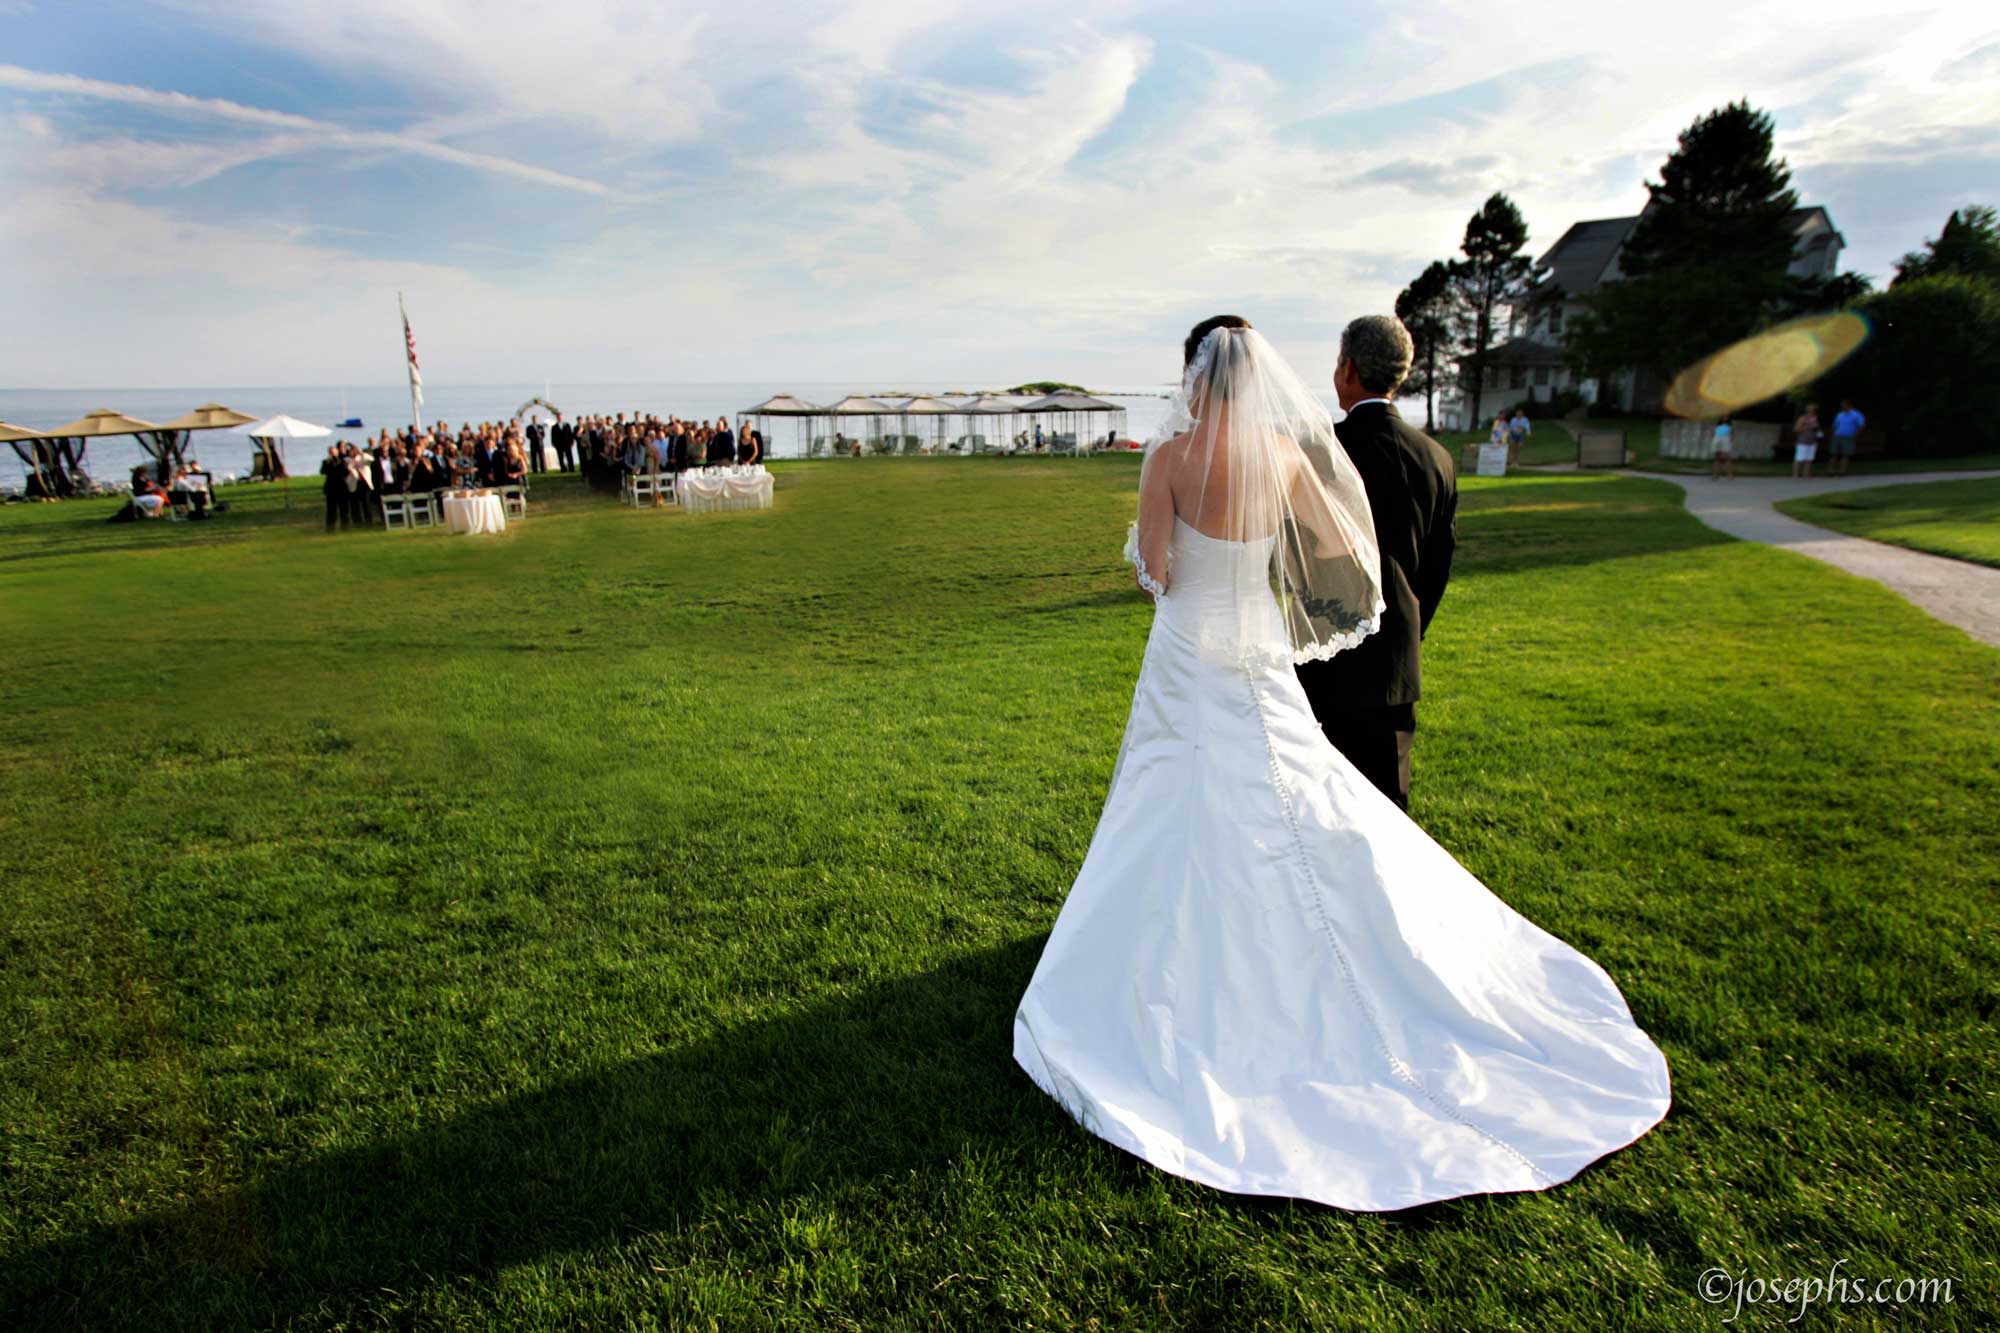 New Wedding Venues: Water's Edge Resort and Spa